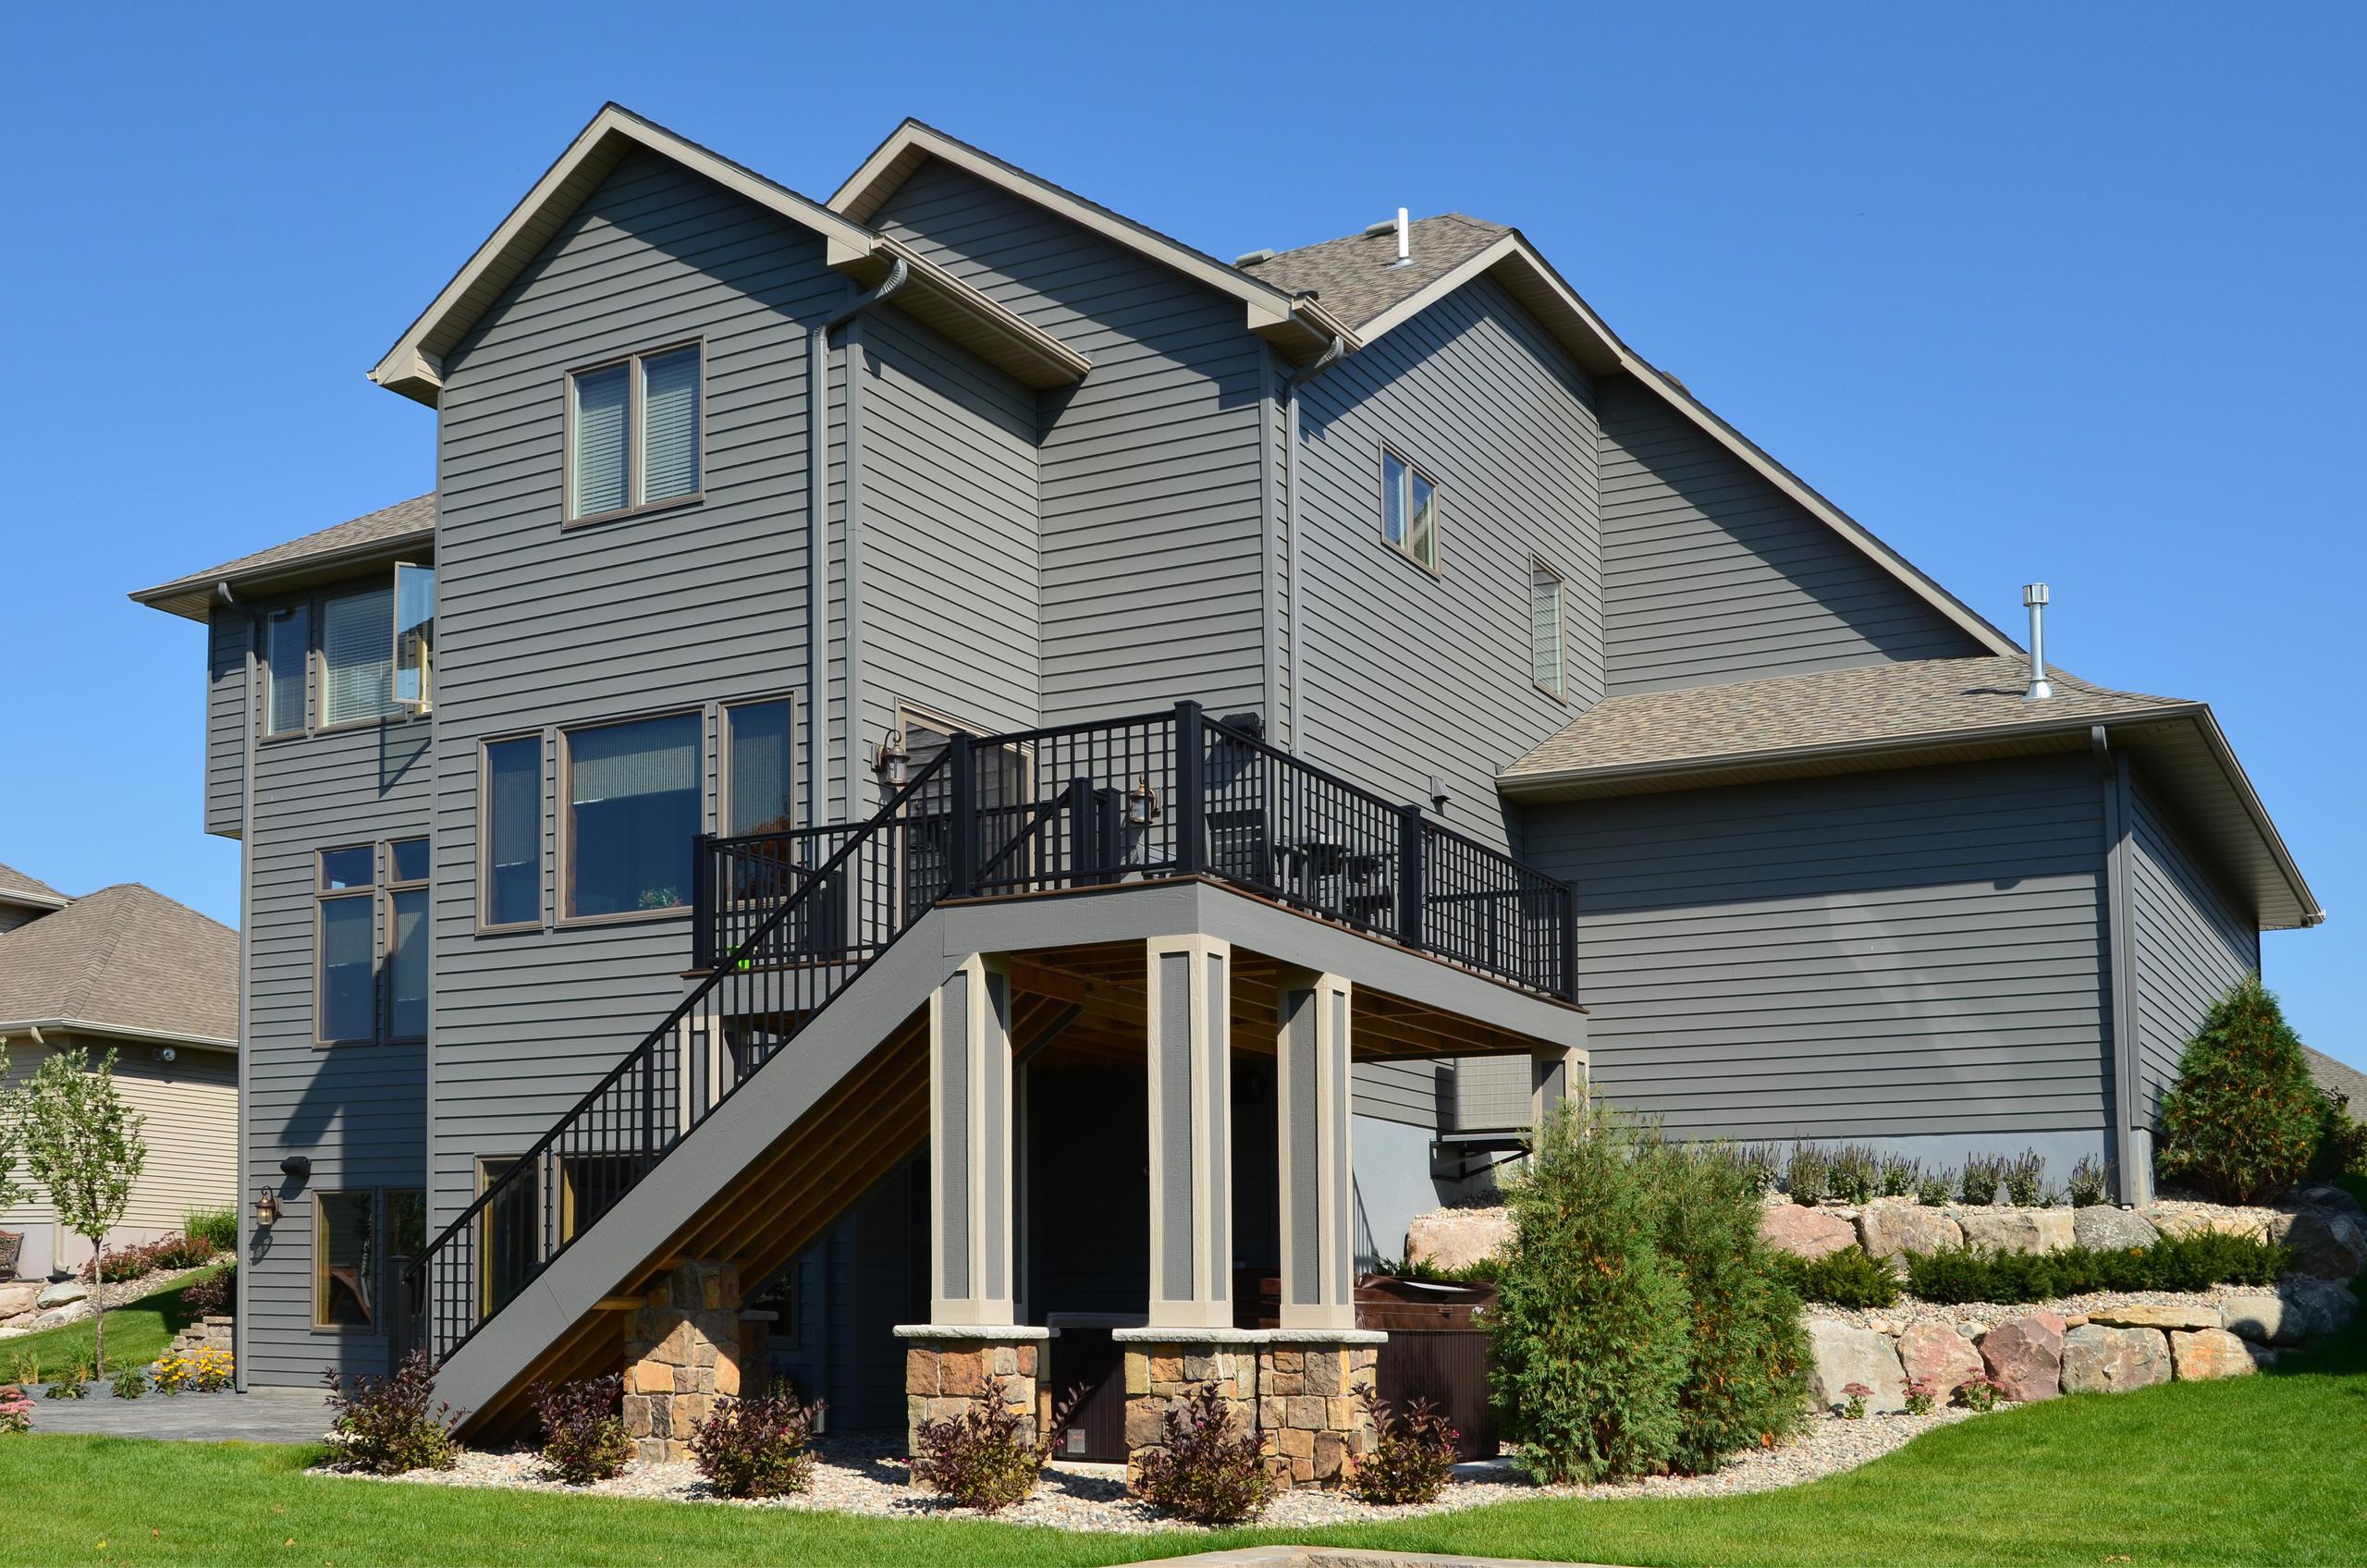 Style and quality were deciding factors for this homeowner when selecting siding for their new home. EDCO's steel siding provides the style you want with the highest quality product available